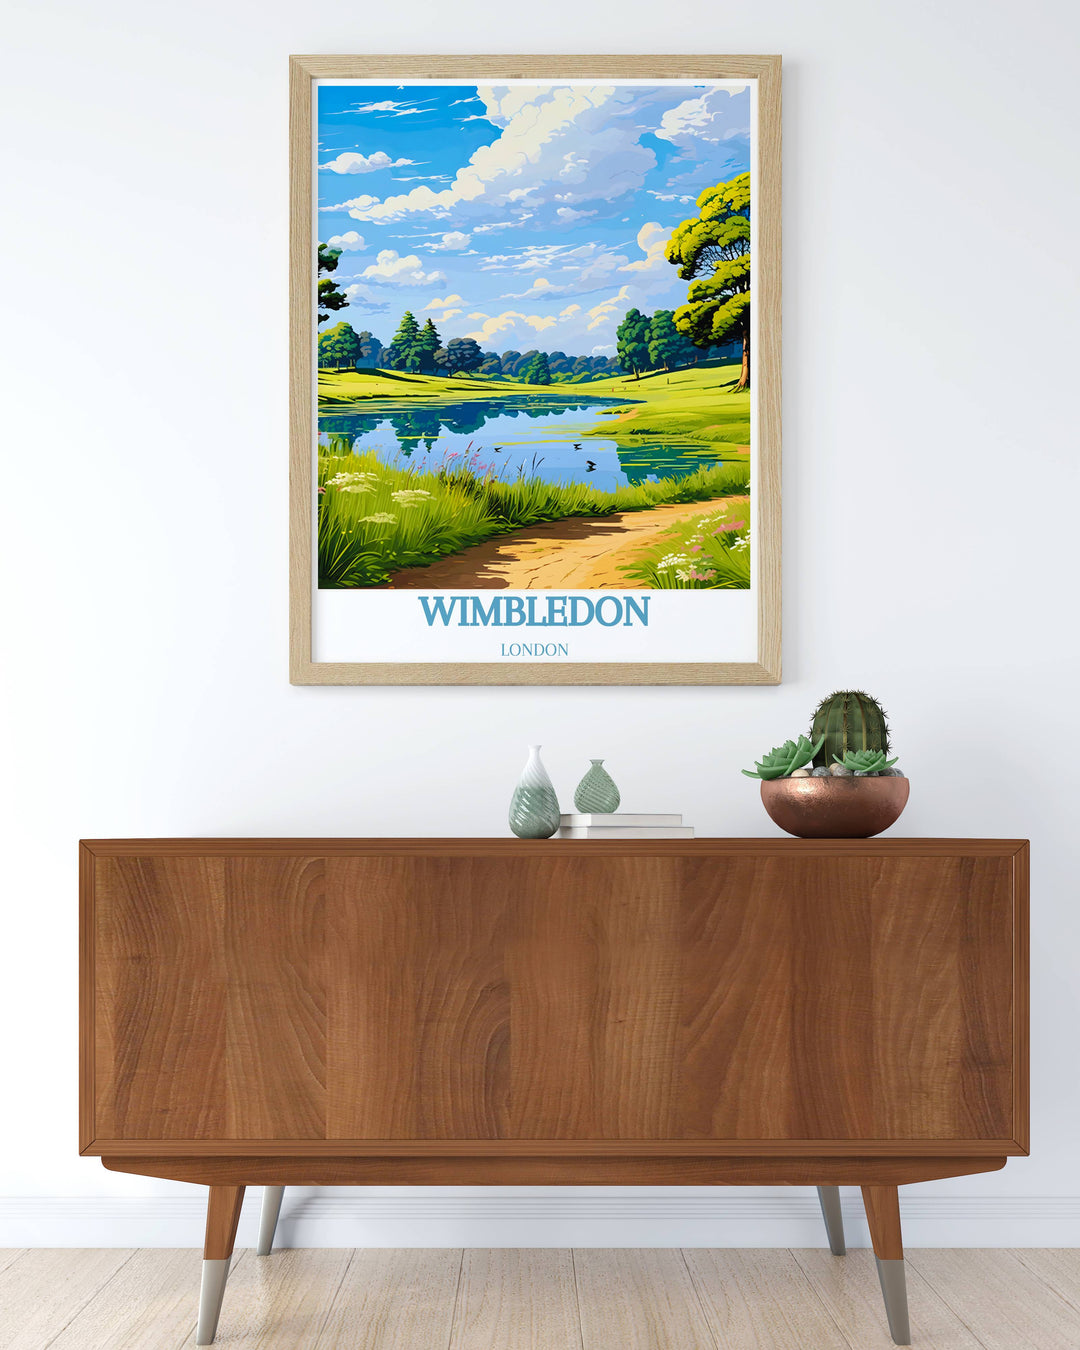 Wimbledon Windmill poster capturing the architectural beauty and historical significance of this iconic landmark in vibrant colors and intricate details.